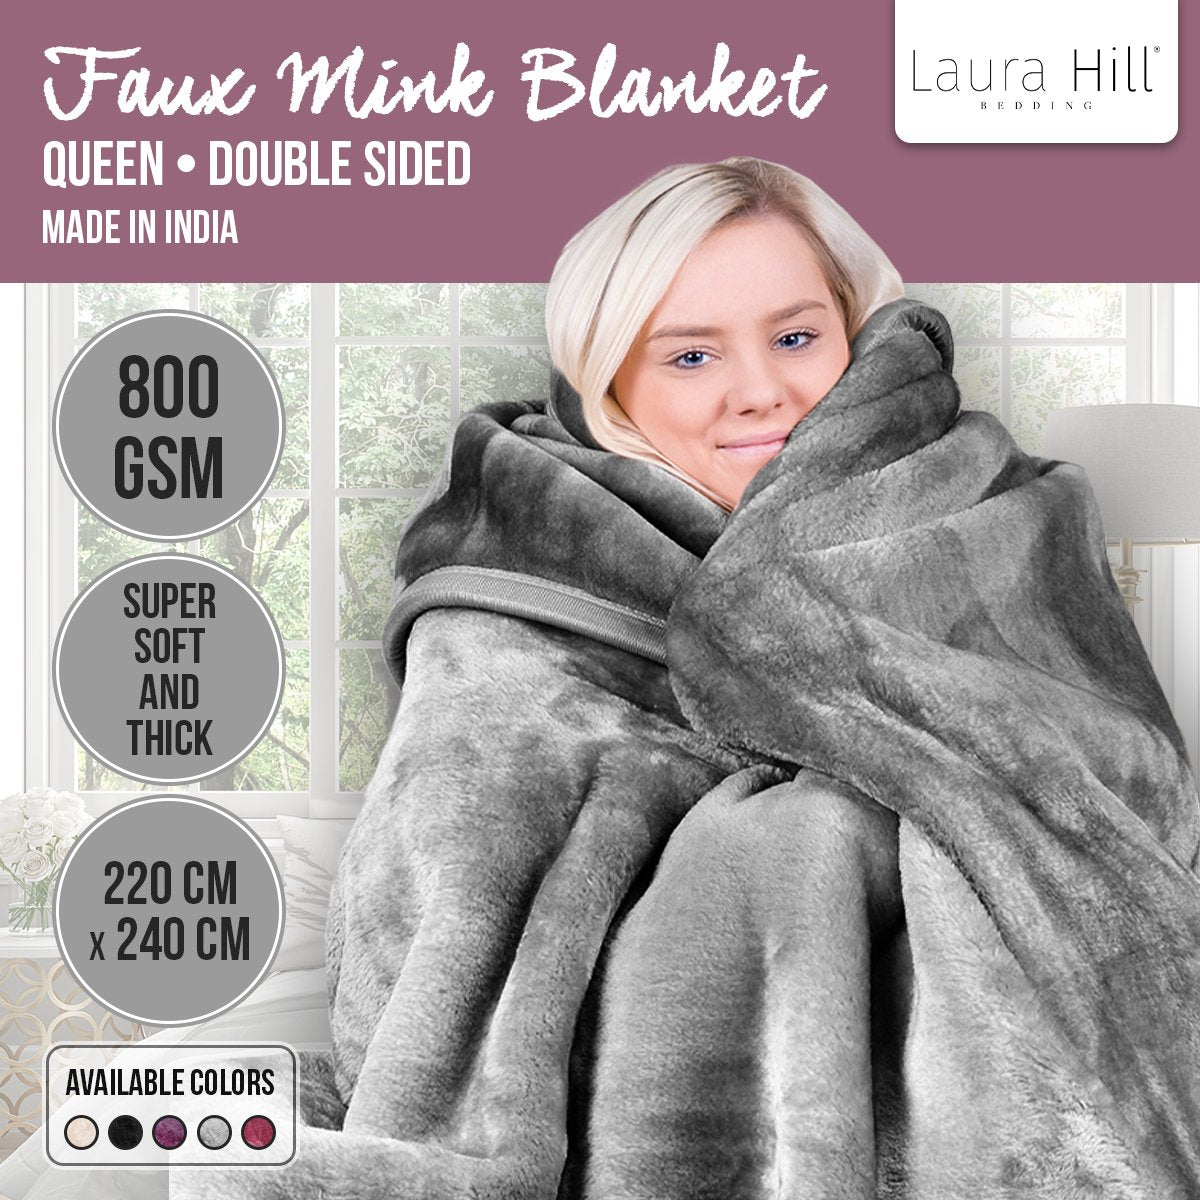 Blonde Lady warm and snug in grey fake mink fluffy blanket by Laura hill.